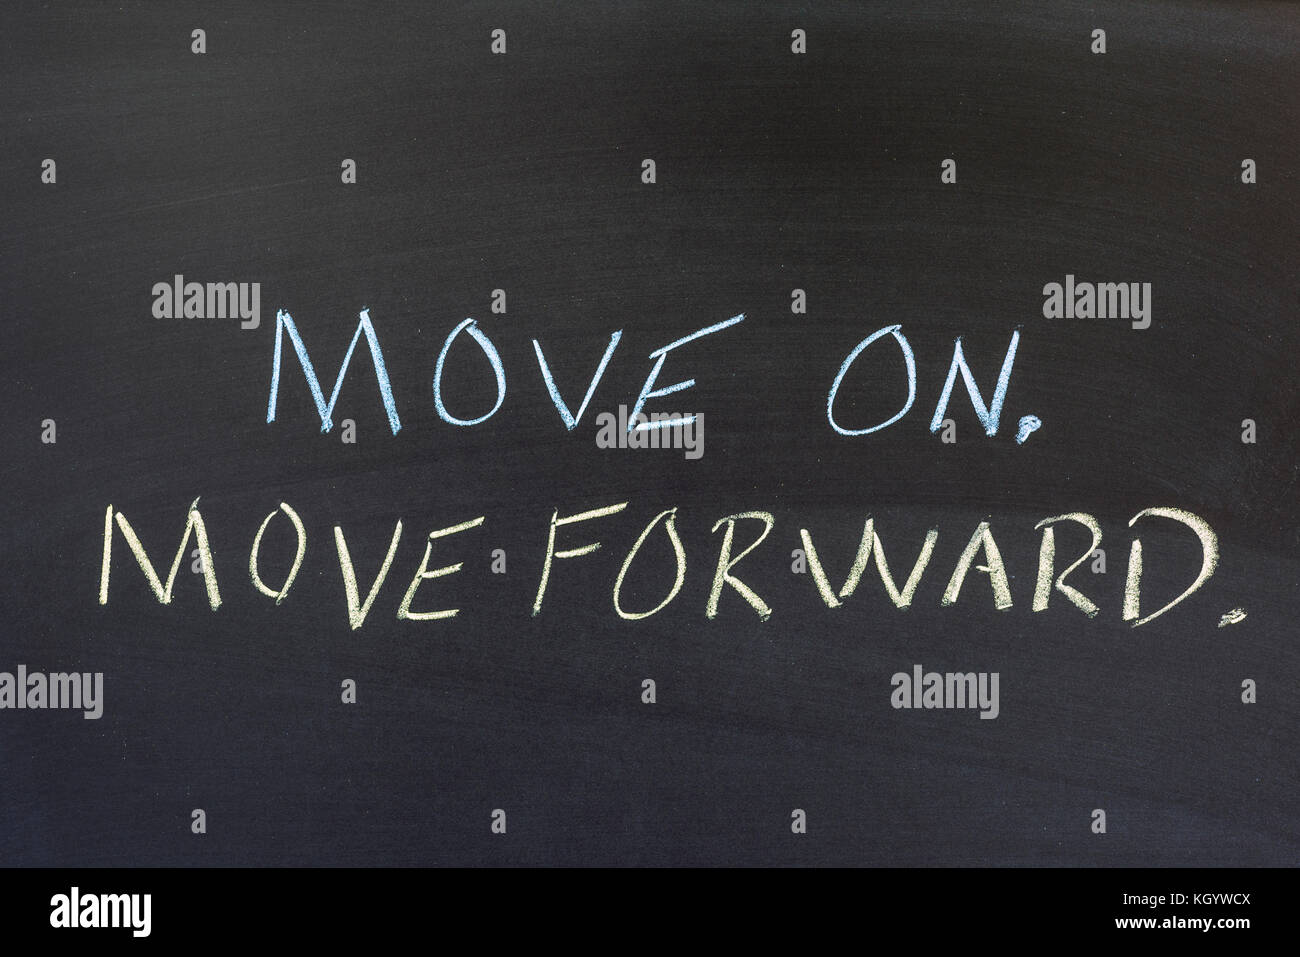 Move On and Move Forward written on a dark colored background. Stock Photo